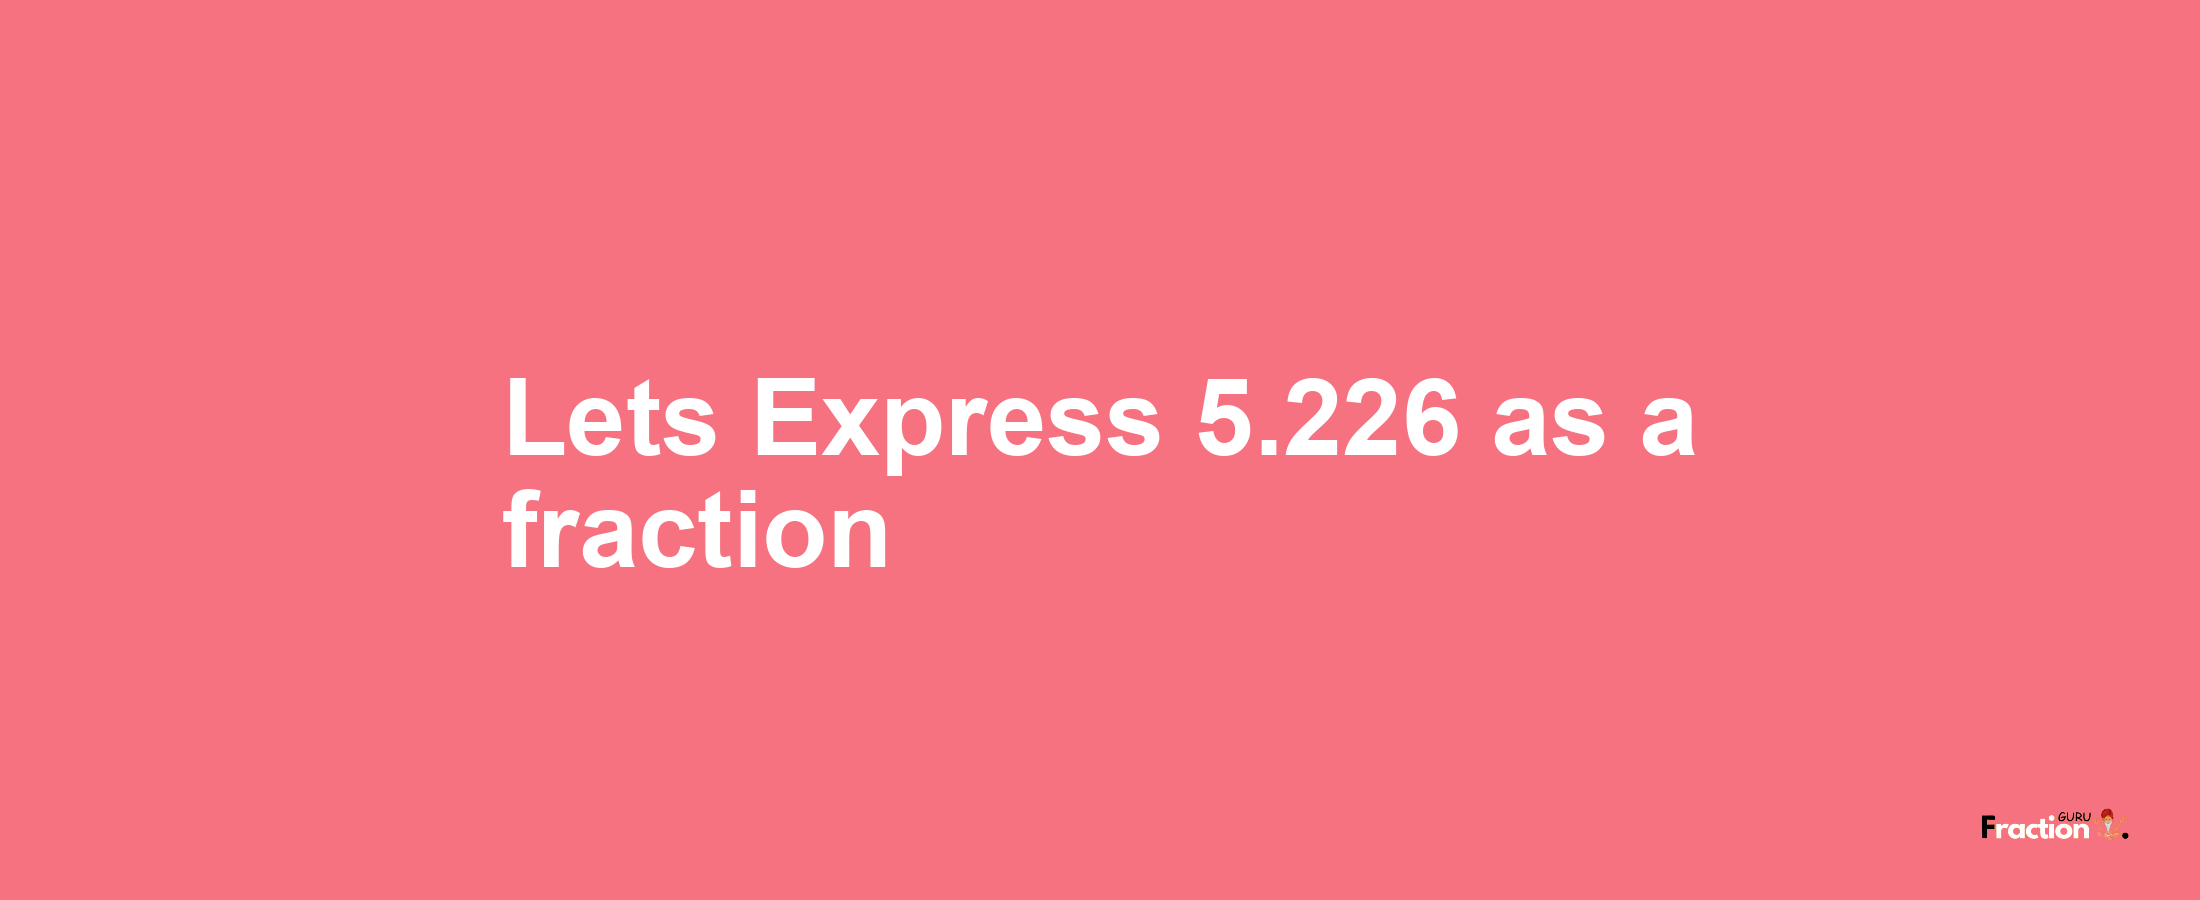 Lets Express 5.226 as afraction